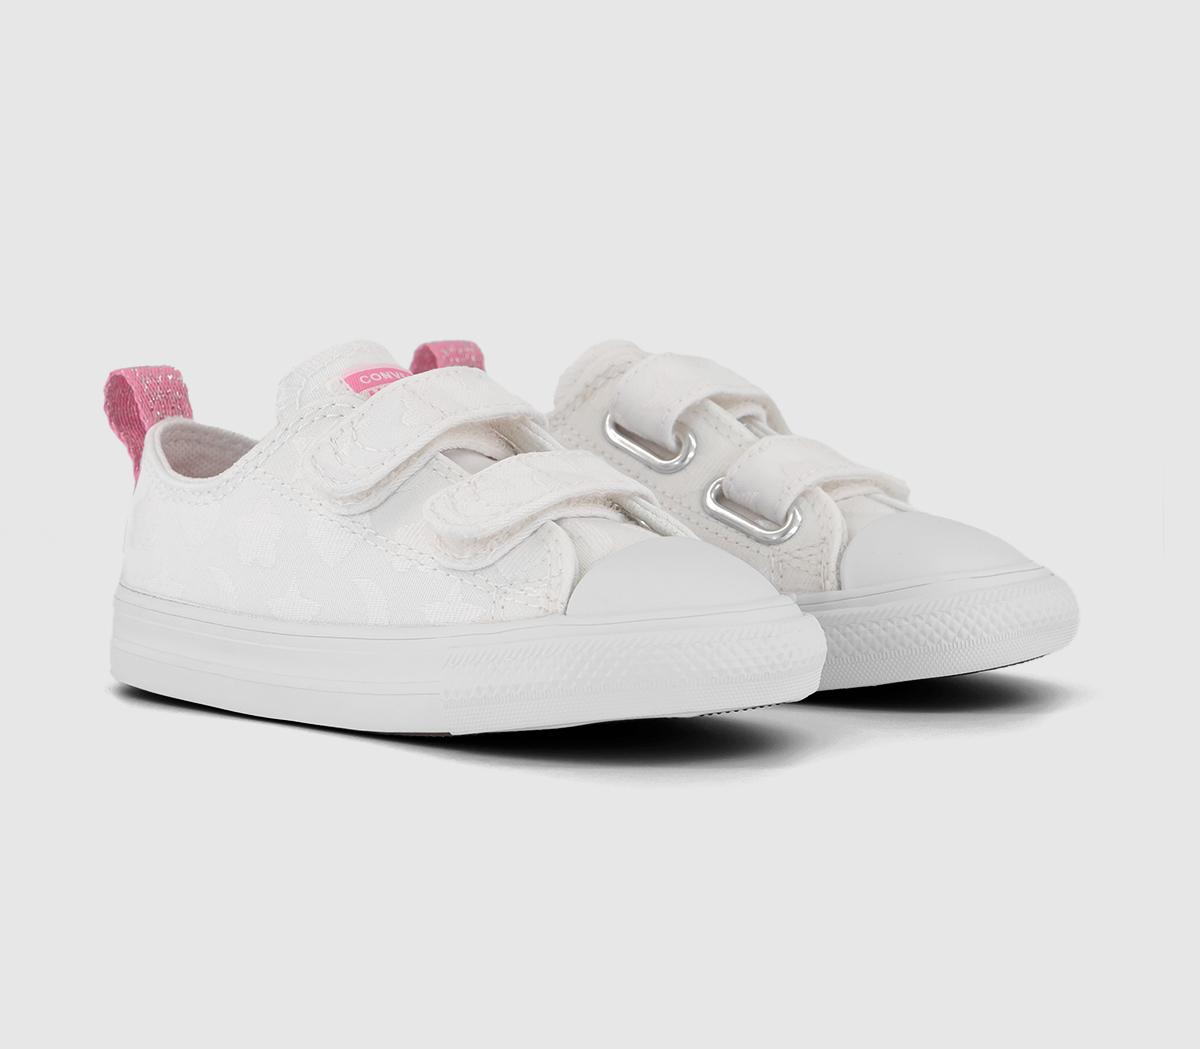 Converse Kids All Star 2vlace Trainers White Oops Pink, 3infant